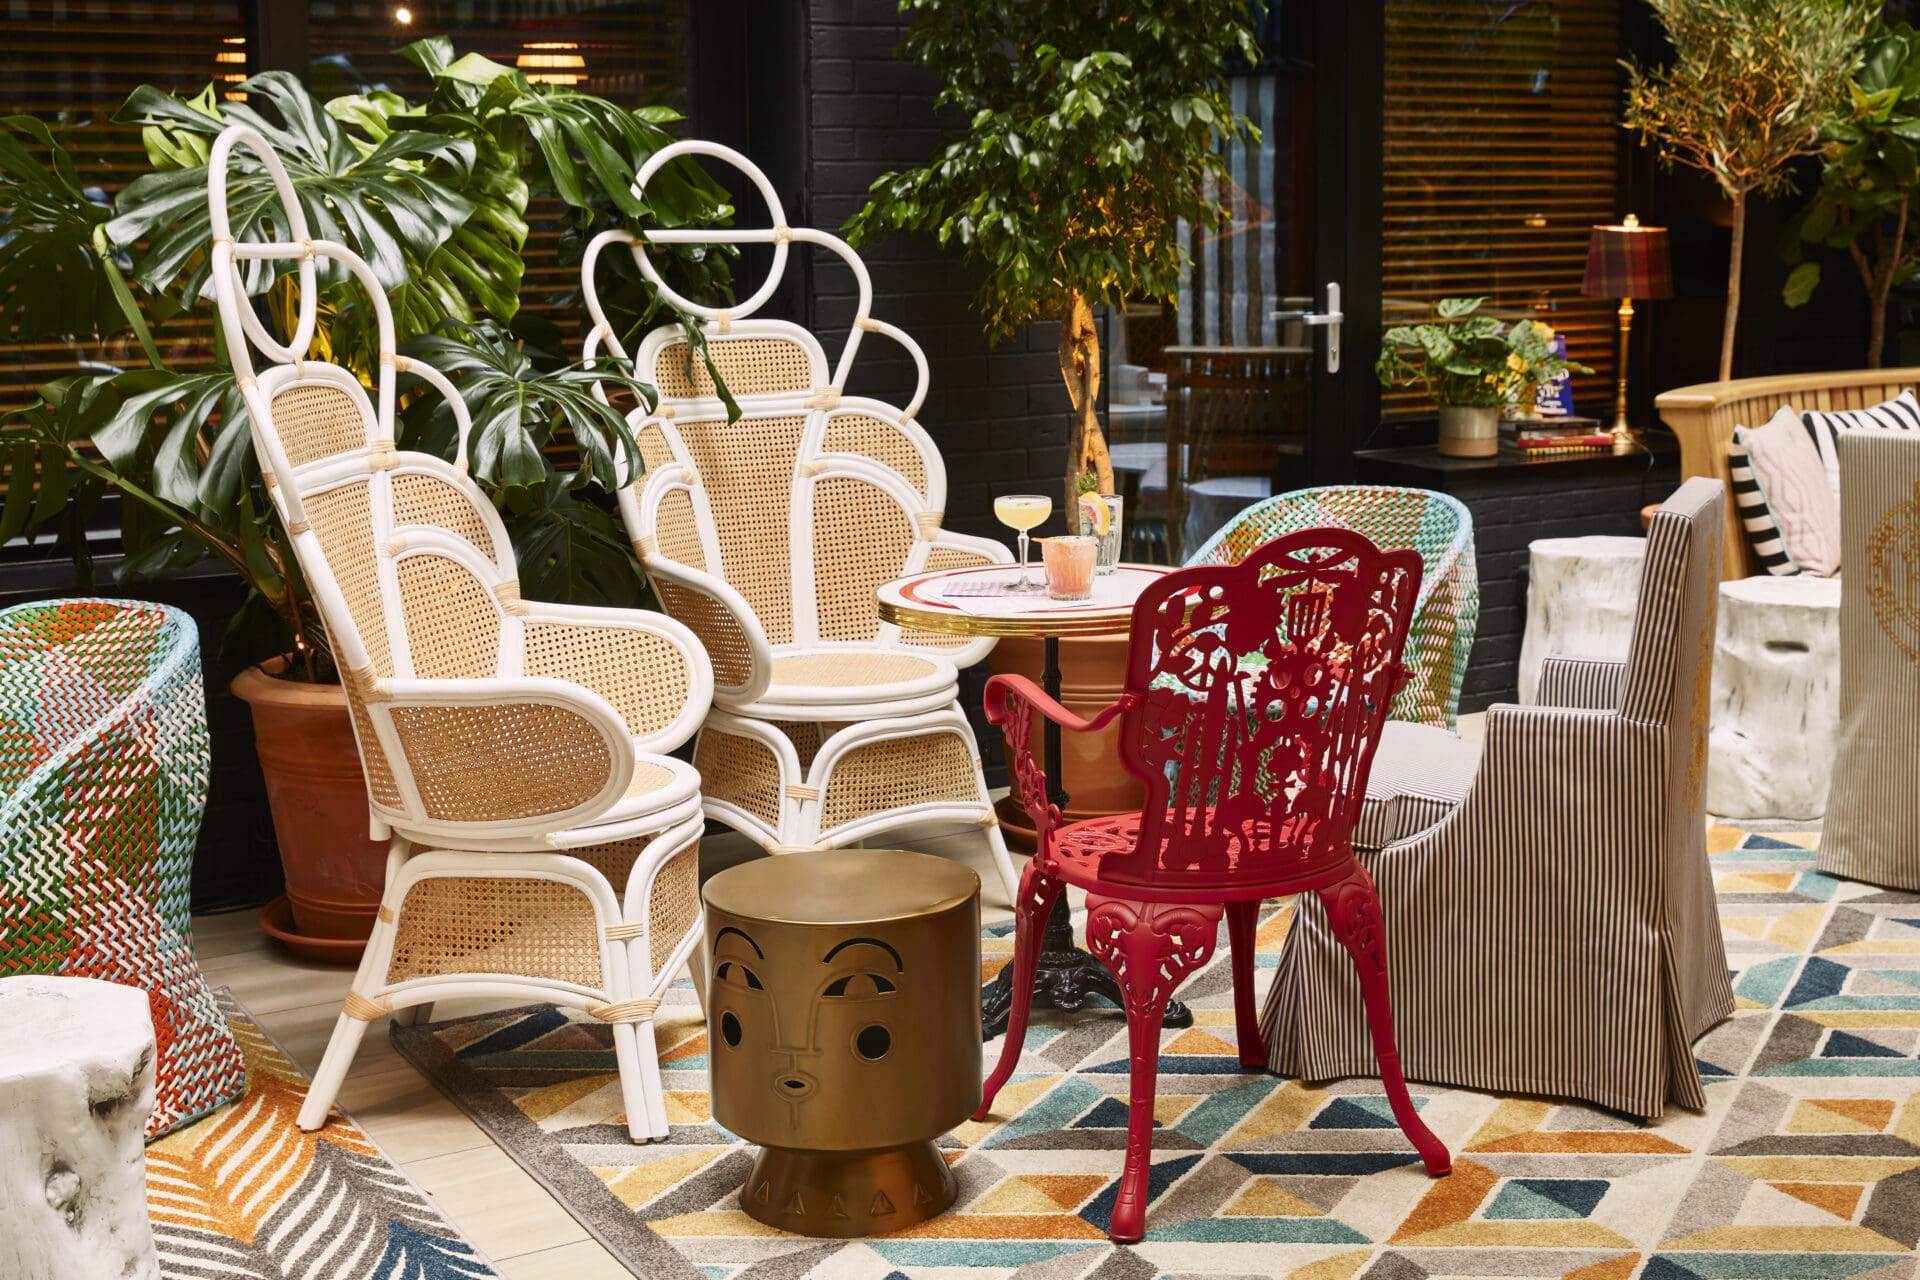 Best hotels in Shoreditch, Dalston and Hackney | A view of the courtyard at Mama Shelter in Shoreditch, London. A mismatched assortment of chairs are arranged around a table, and multi coloured tiles decorate the floor.